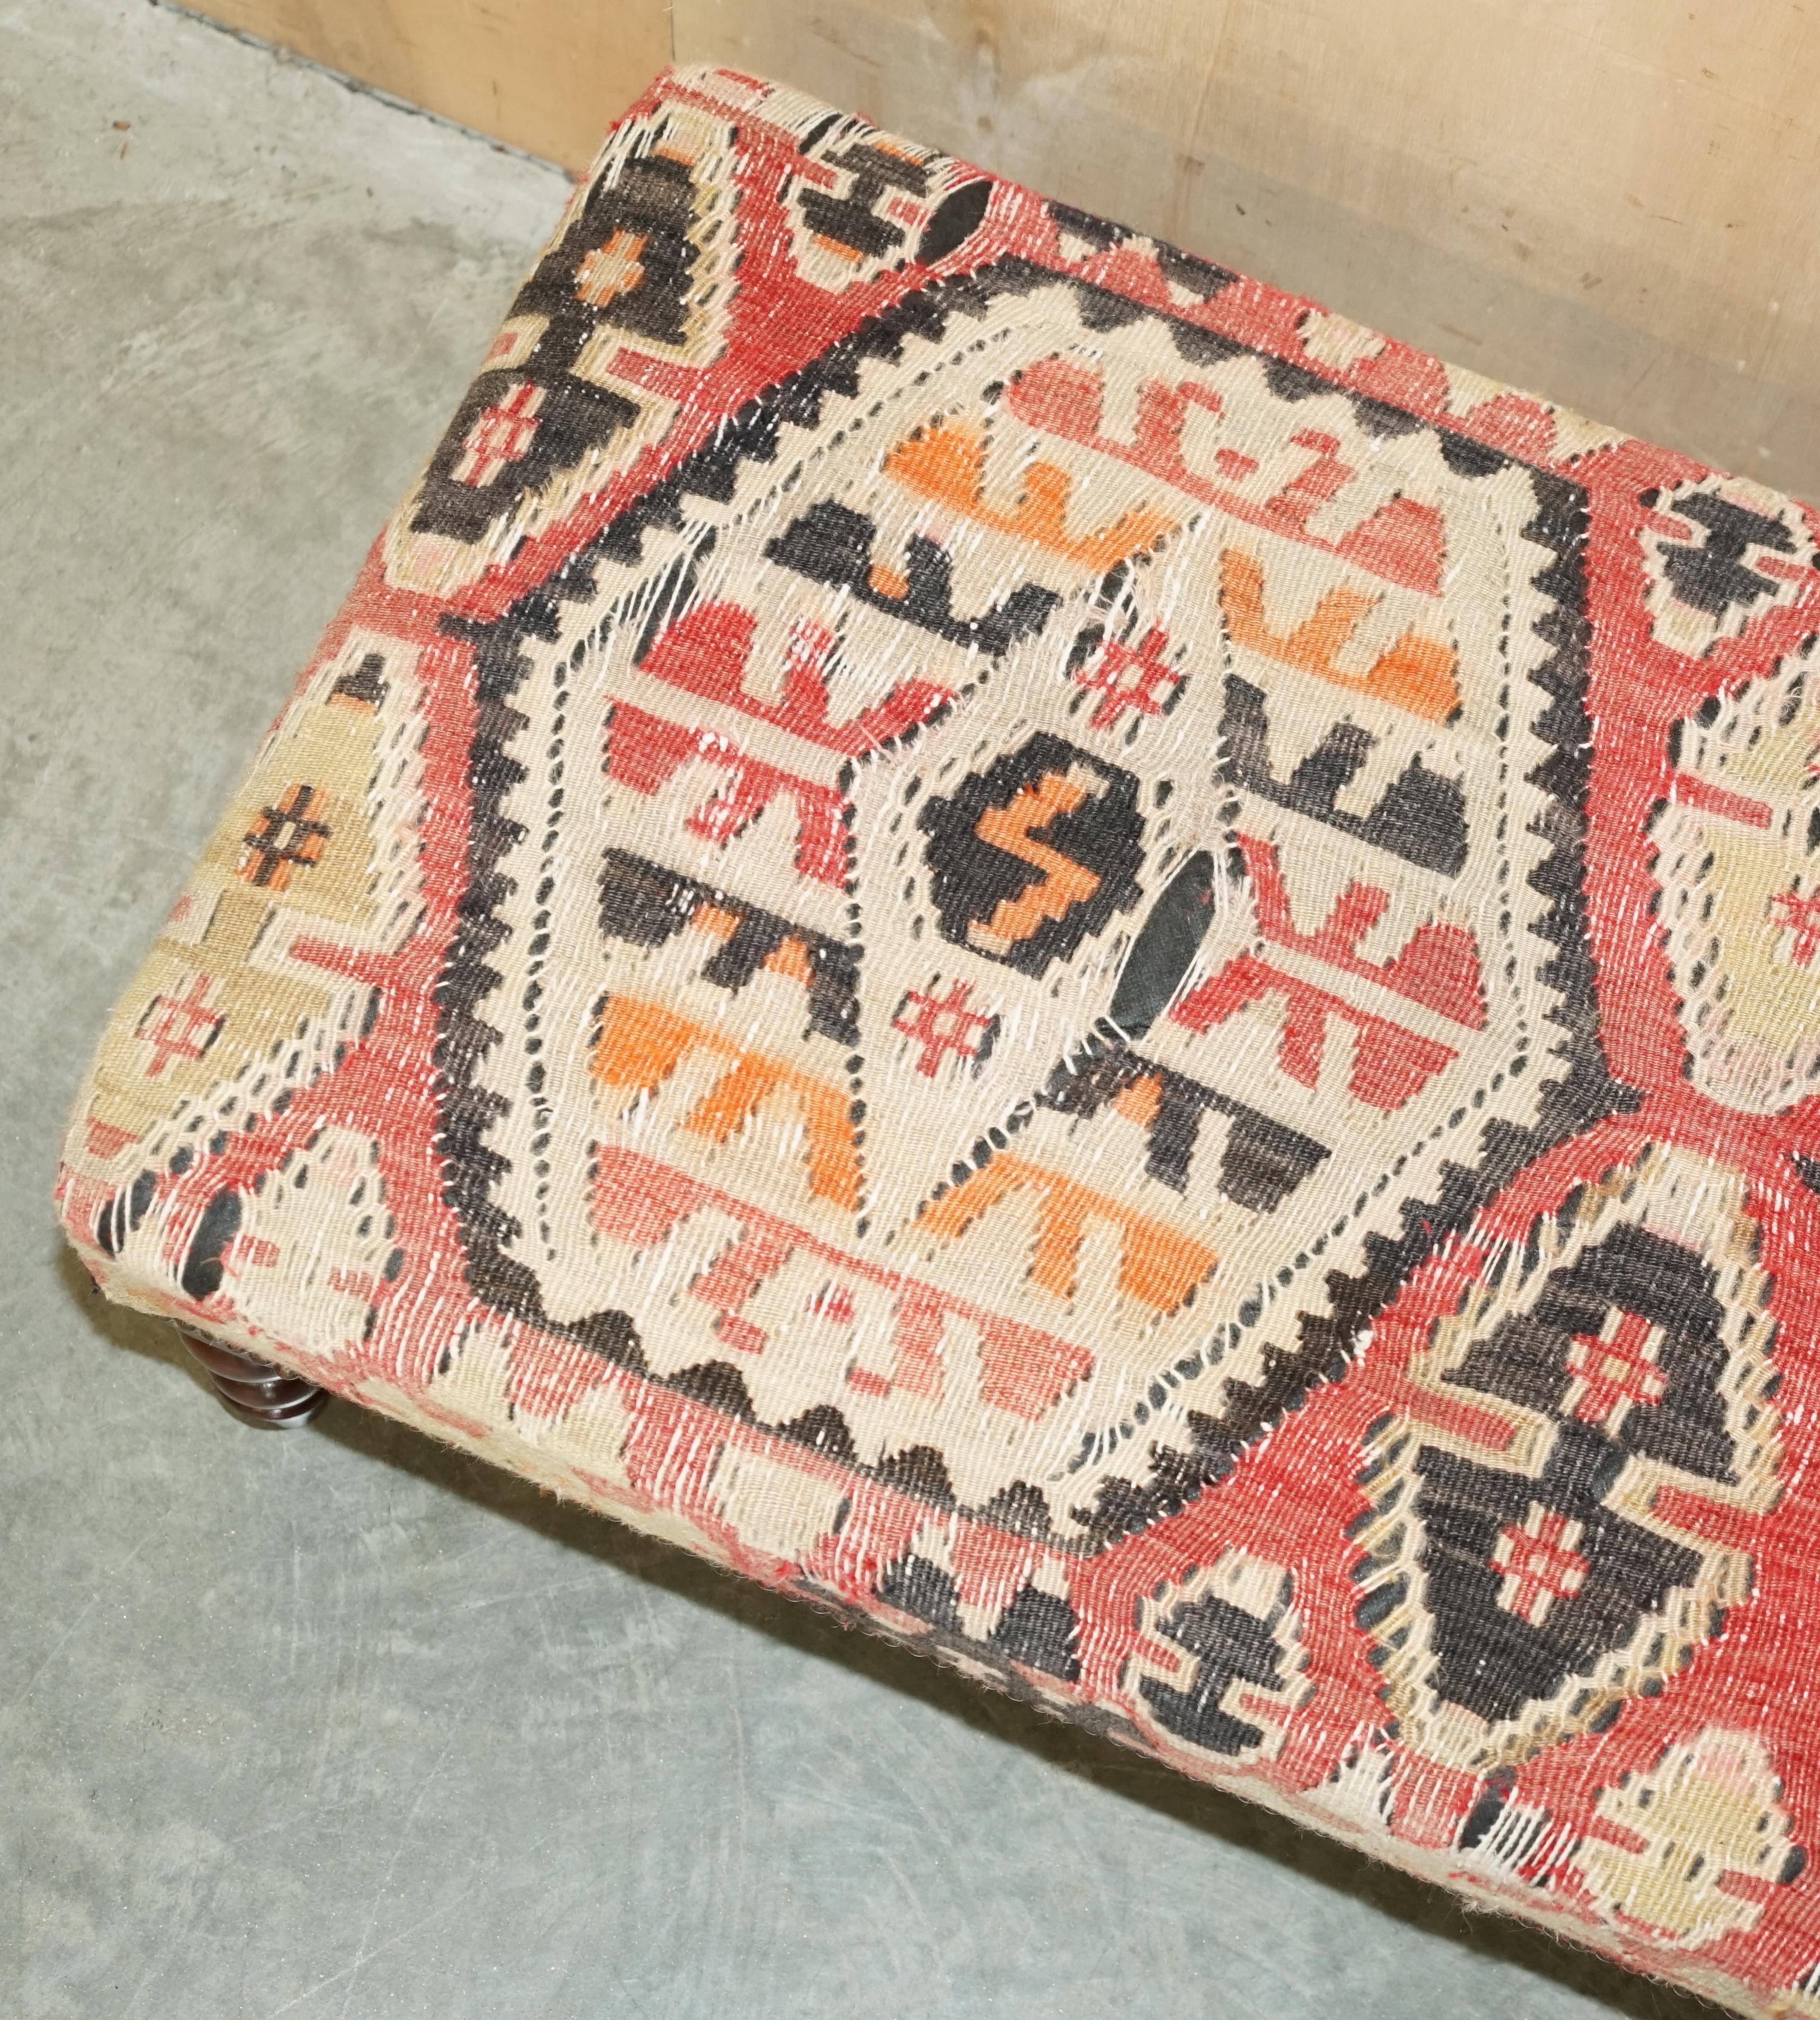 STUNNING AND COLLECTABLE ViNTAGE GEORGE SMITH CHELSEA KILIM FOOTSTOOL OTTOMAN 4